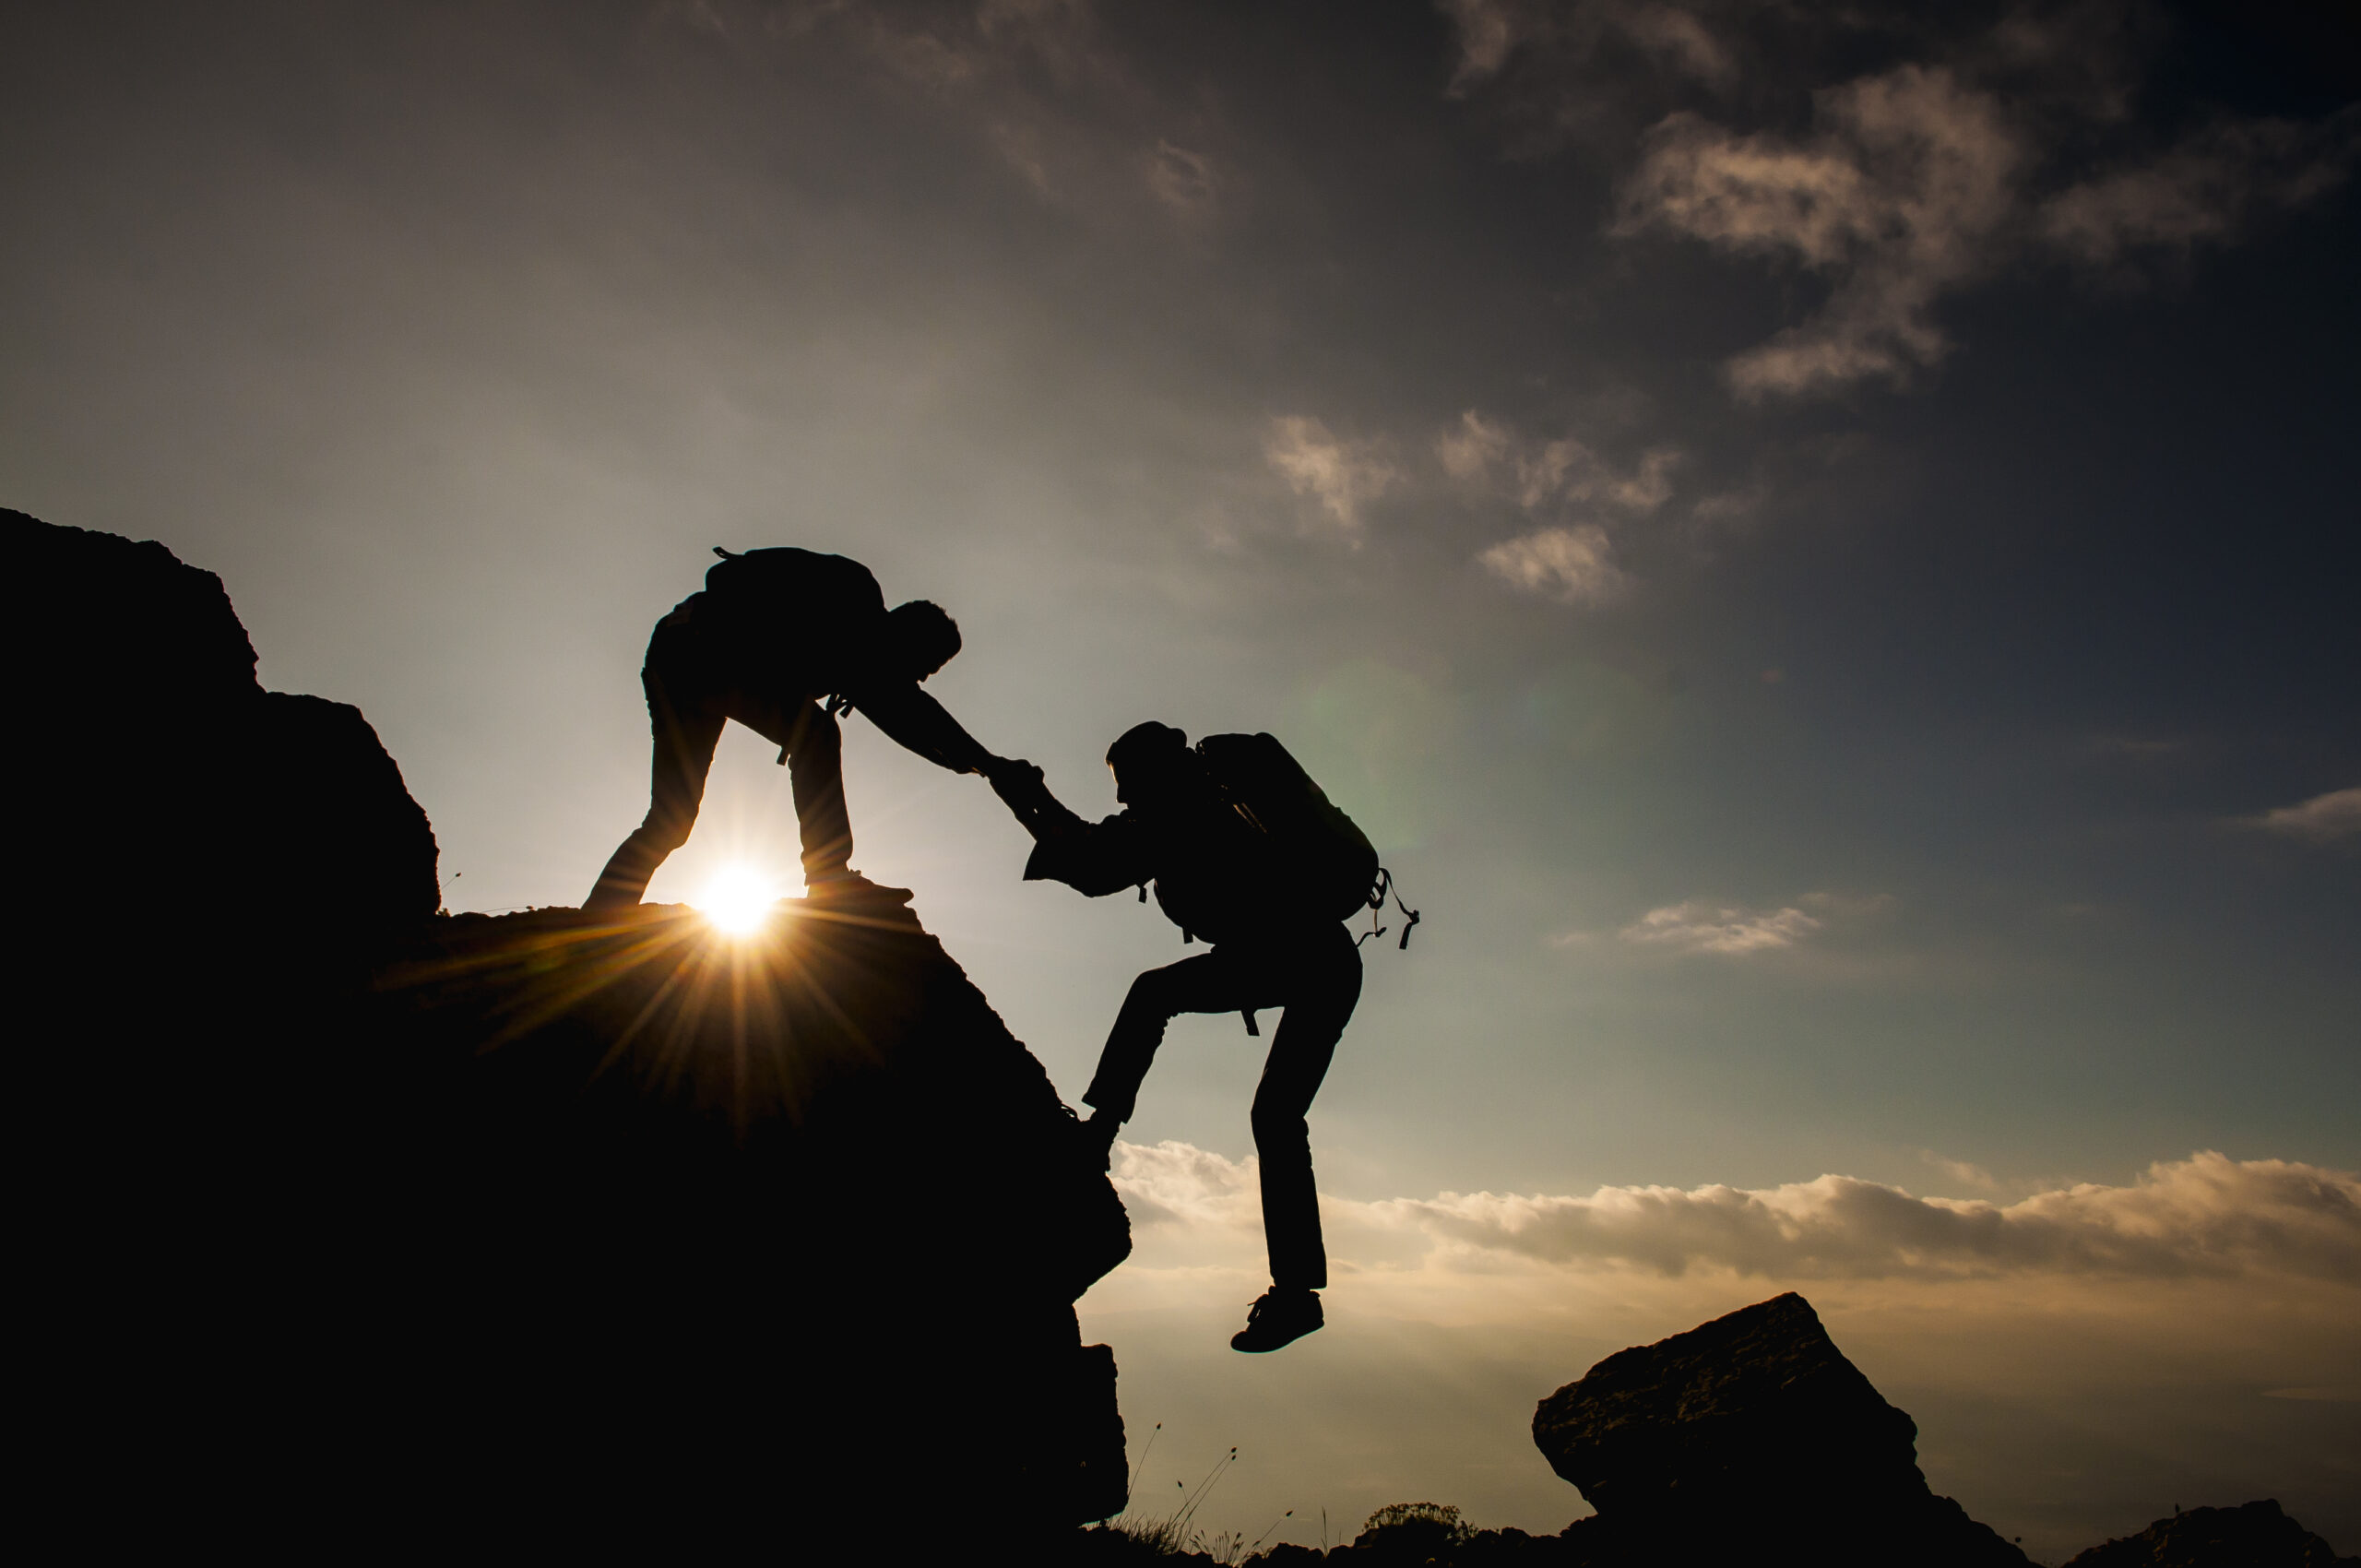 One climber helps another to climb suggesting the organizational culture within the VCG